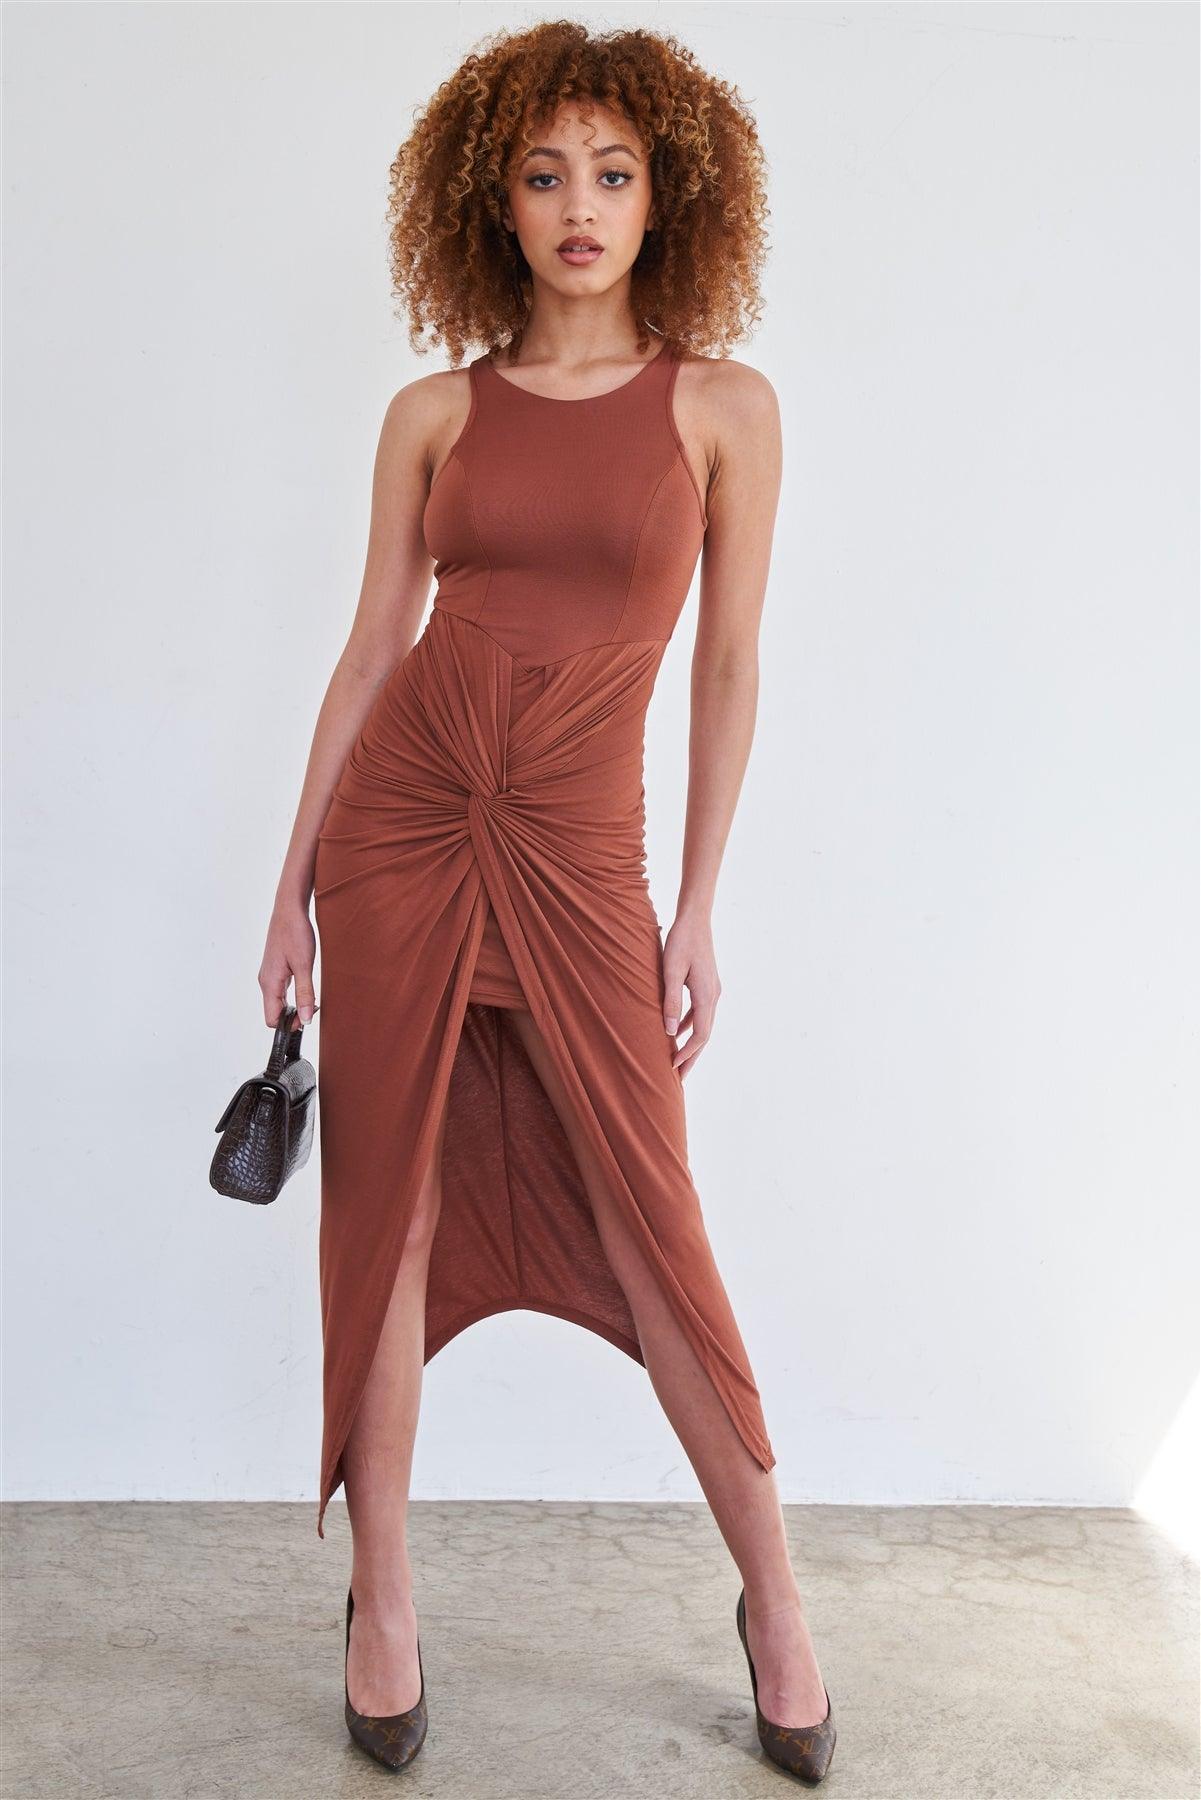 Coffee Sleeveless Knotted Skirt Snatched Midi Body-Con Tank Dress